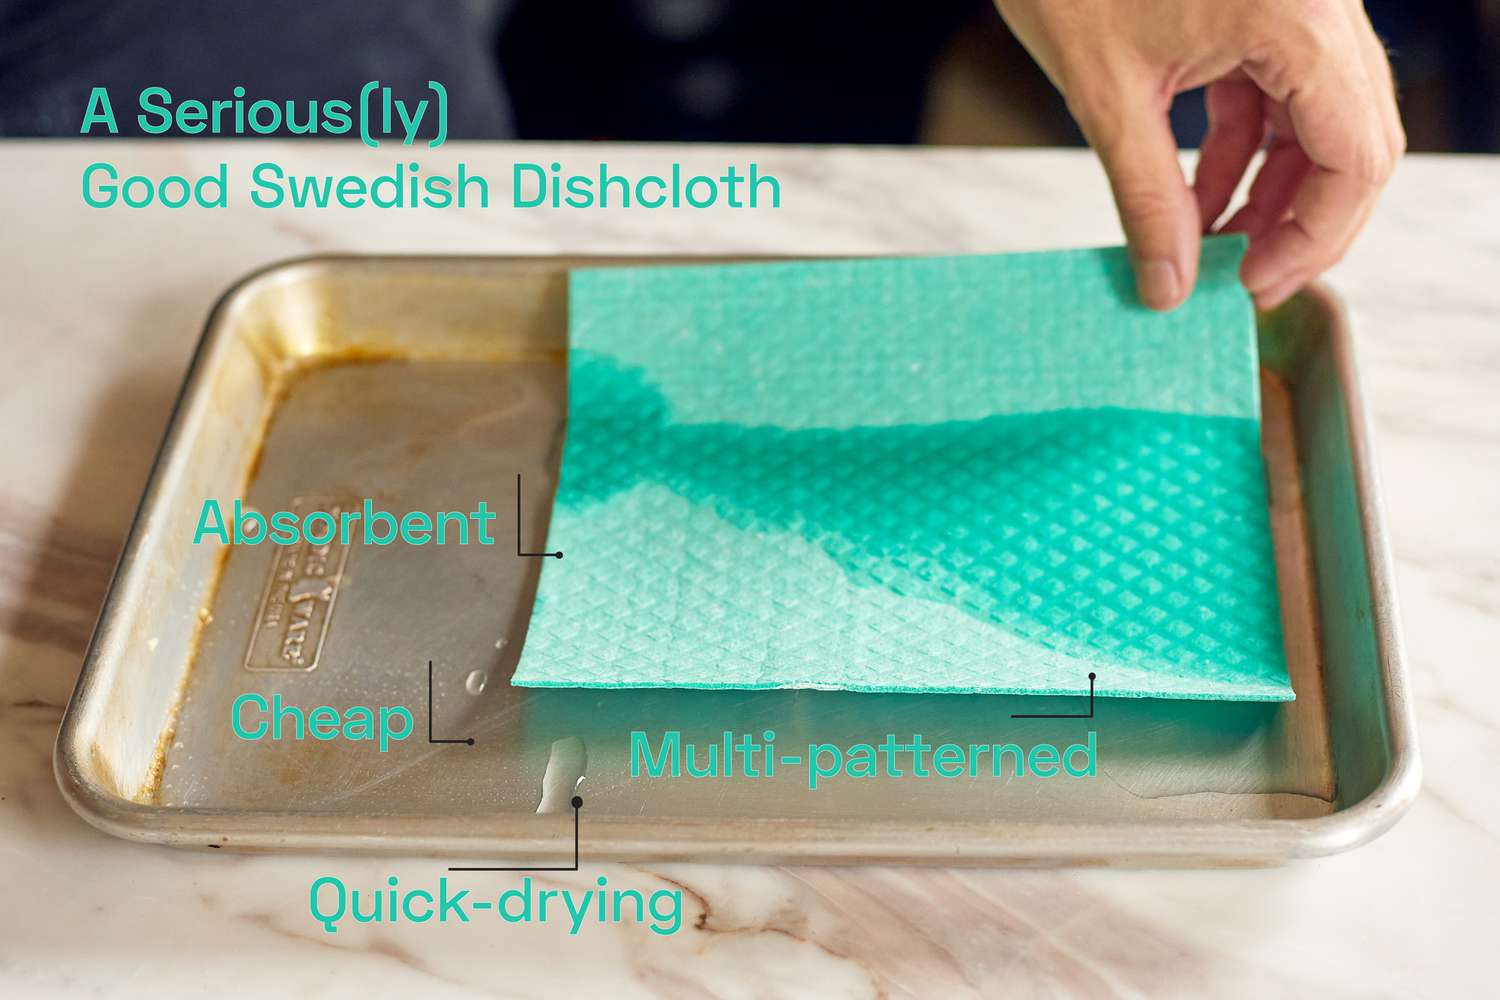 A swedish dishcloth being soaked in water